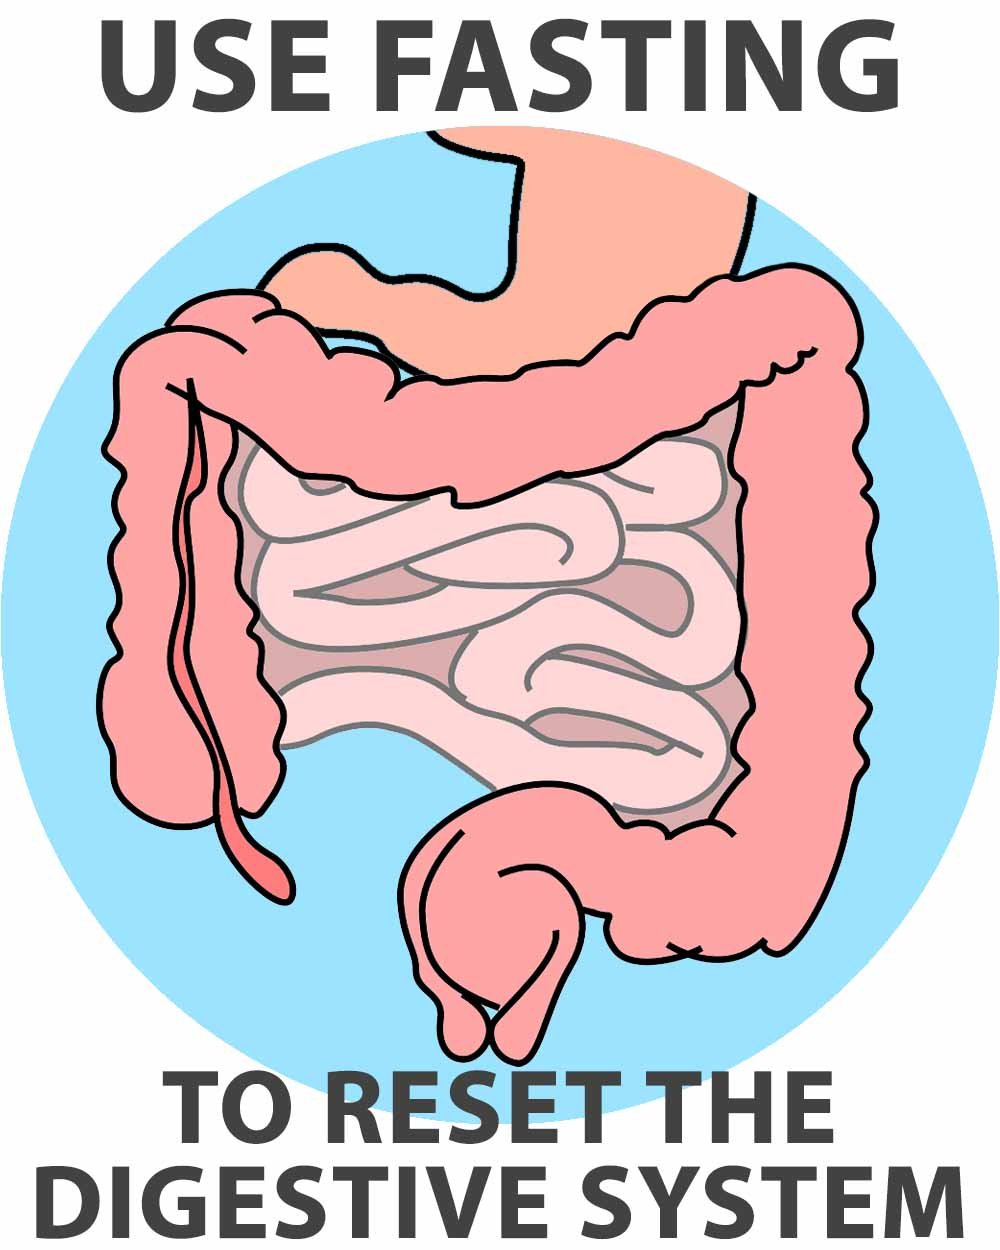 Use Fasting to Reset the Digestive System.jpg